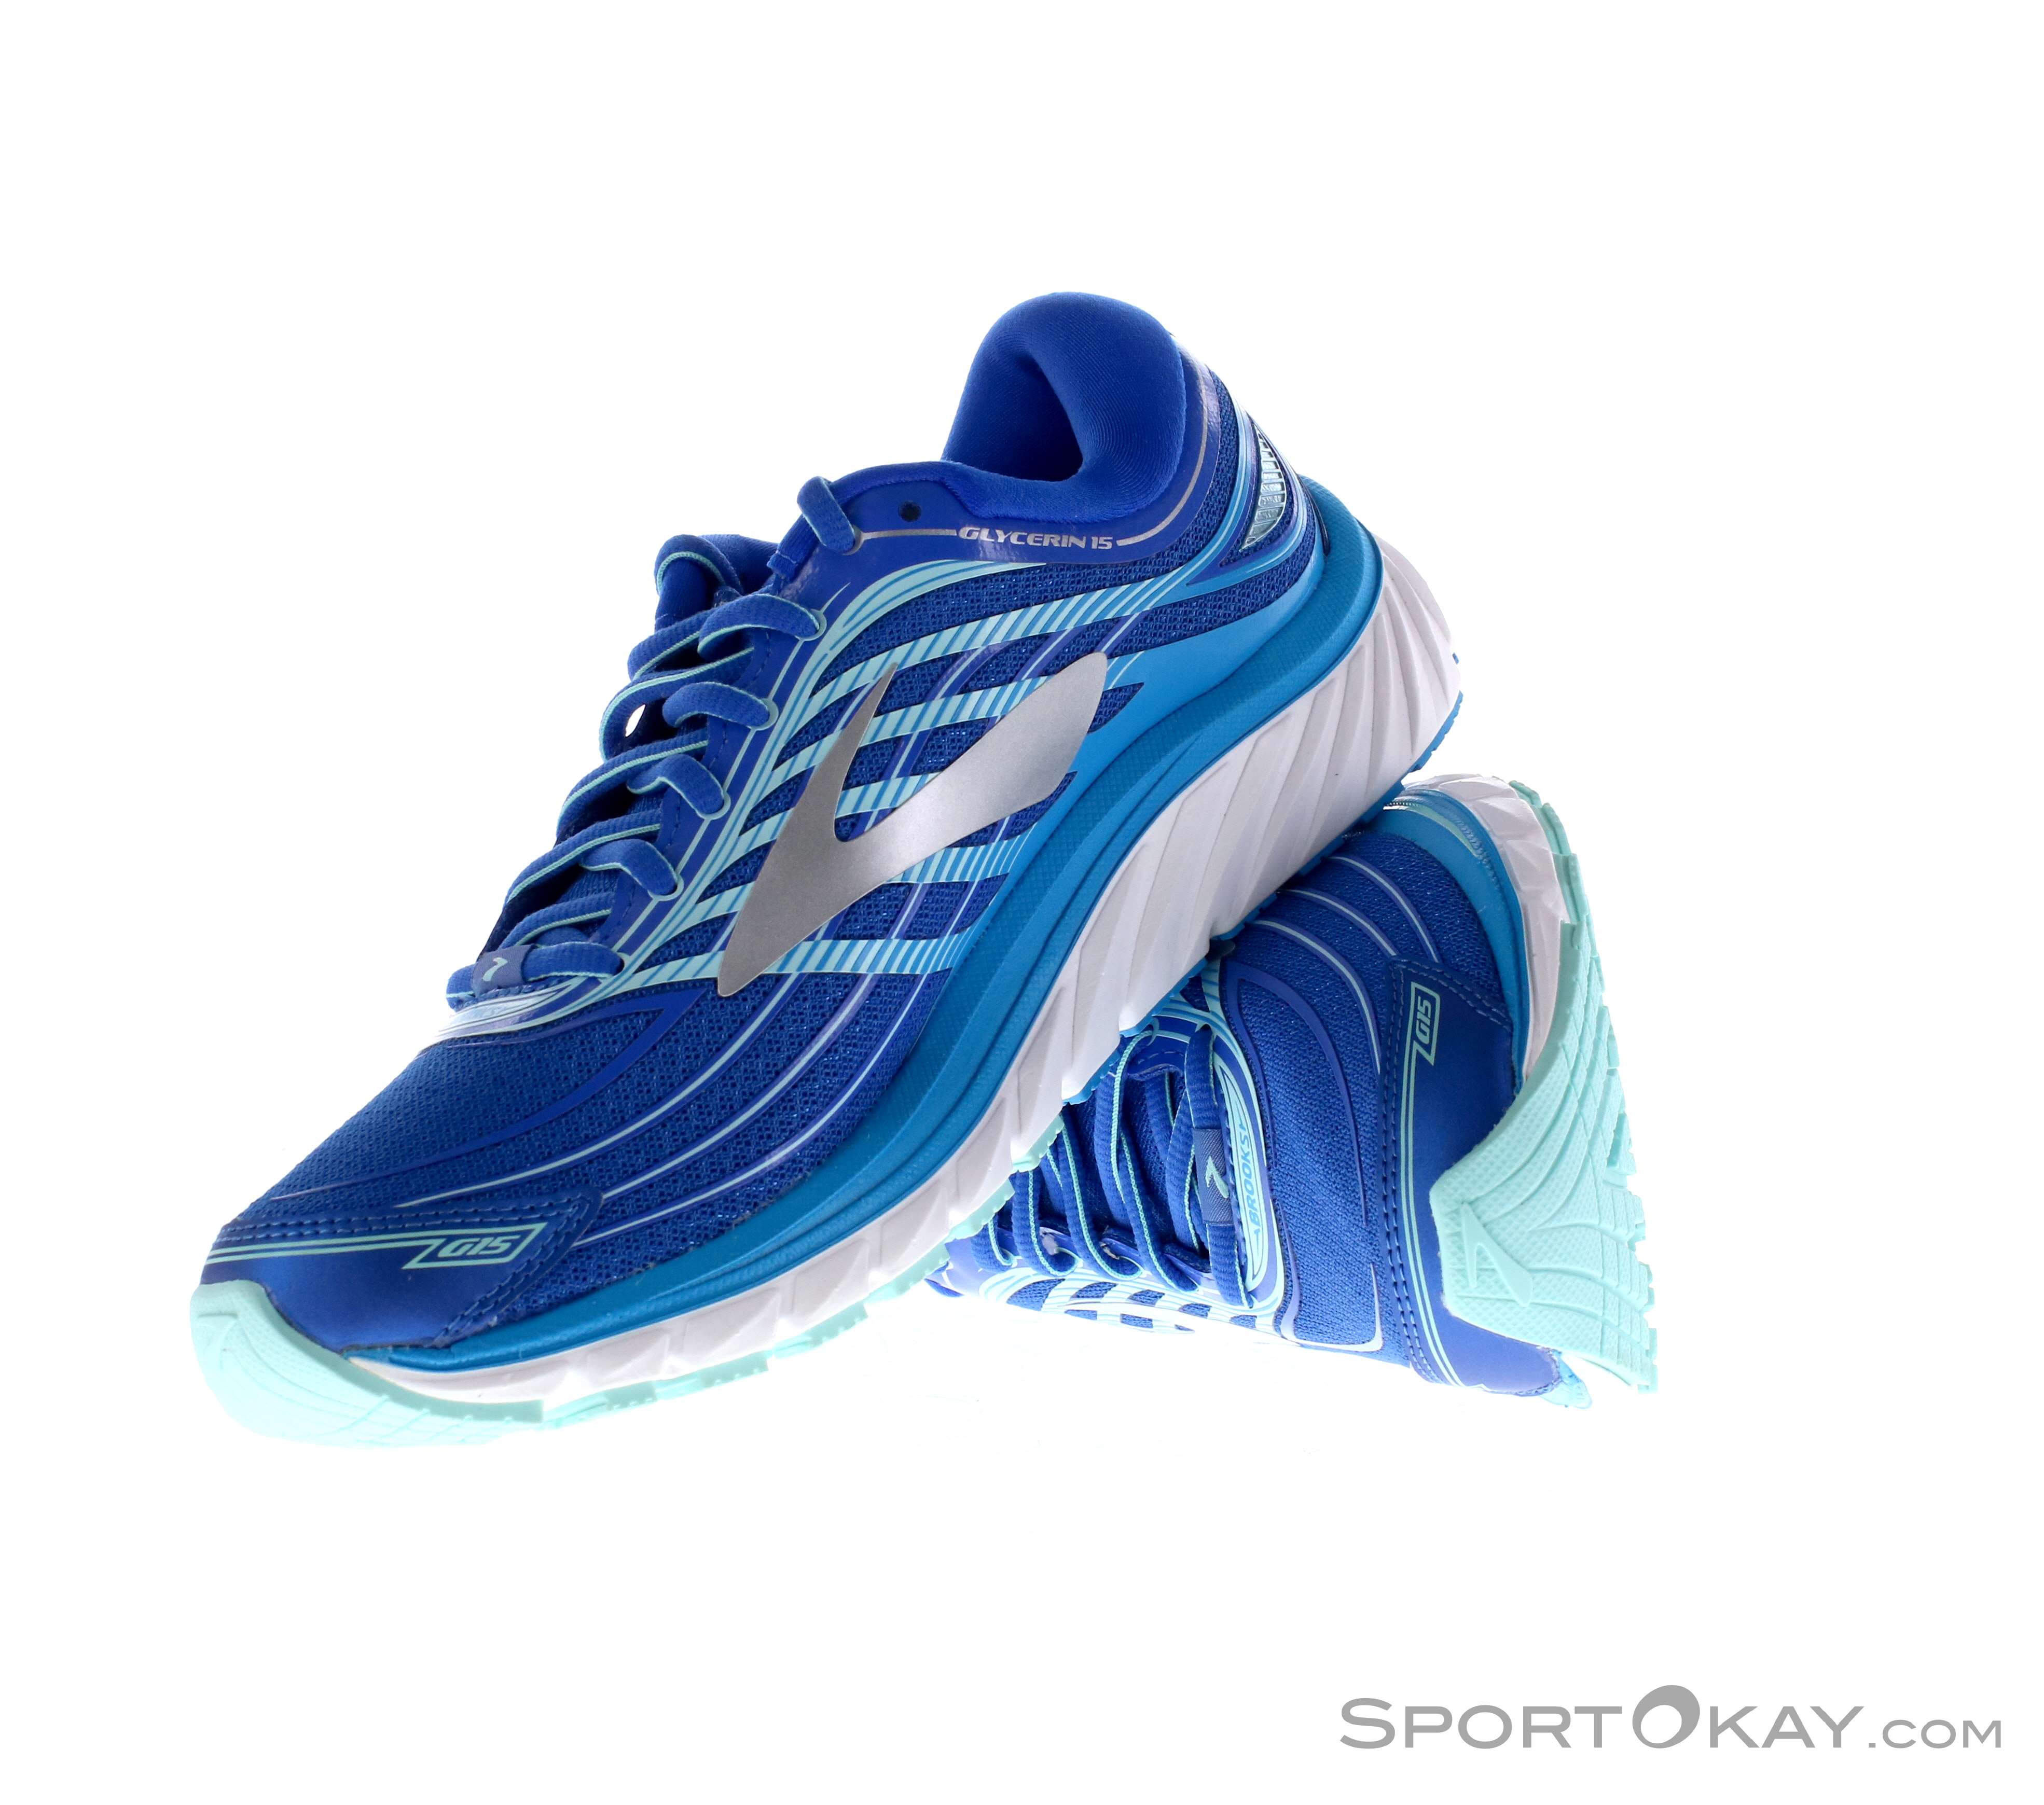 Ladies Brooks Glycerin 15 Running Trainers Size 7 